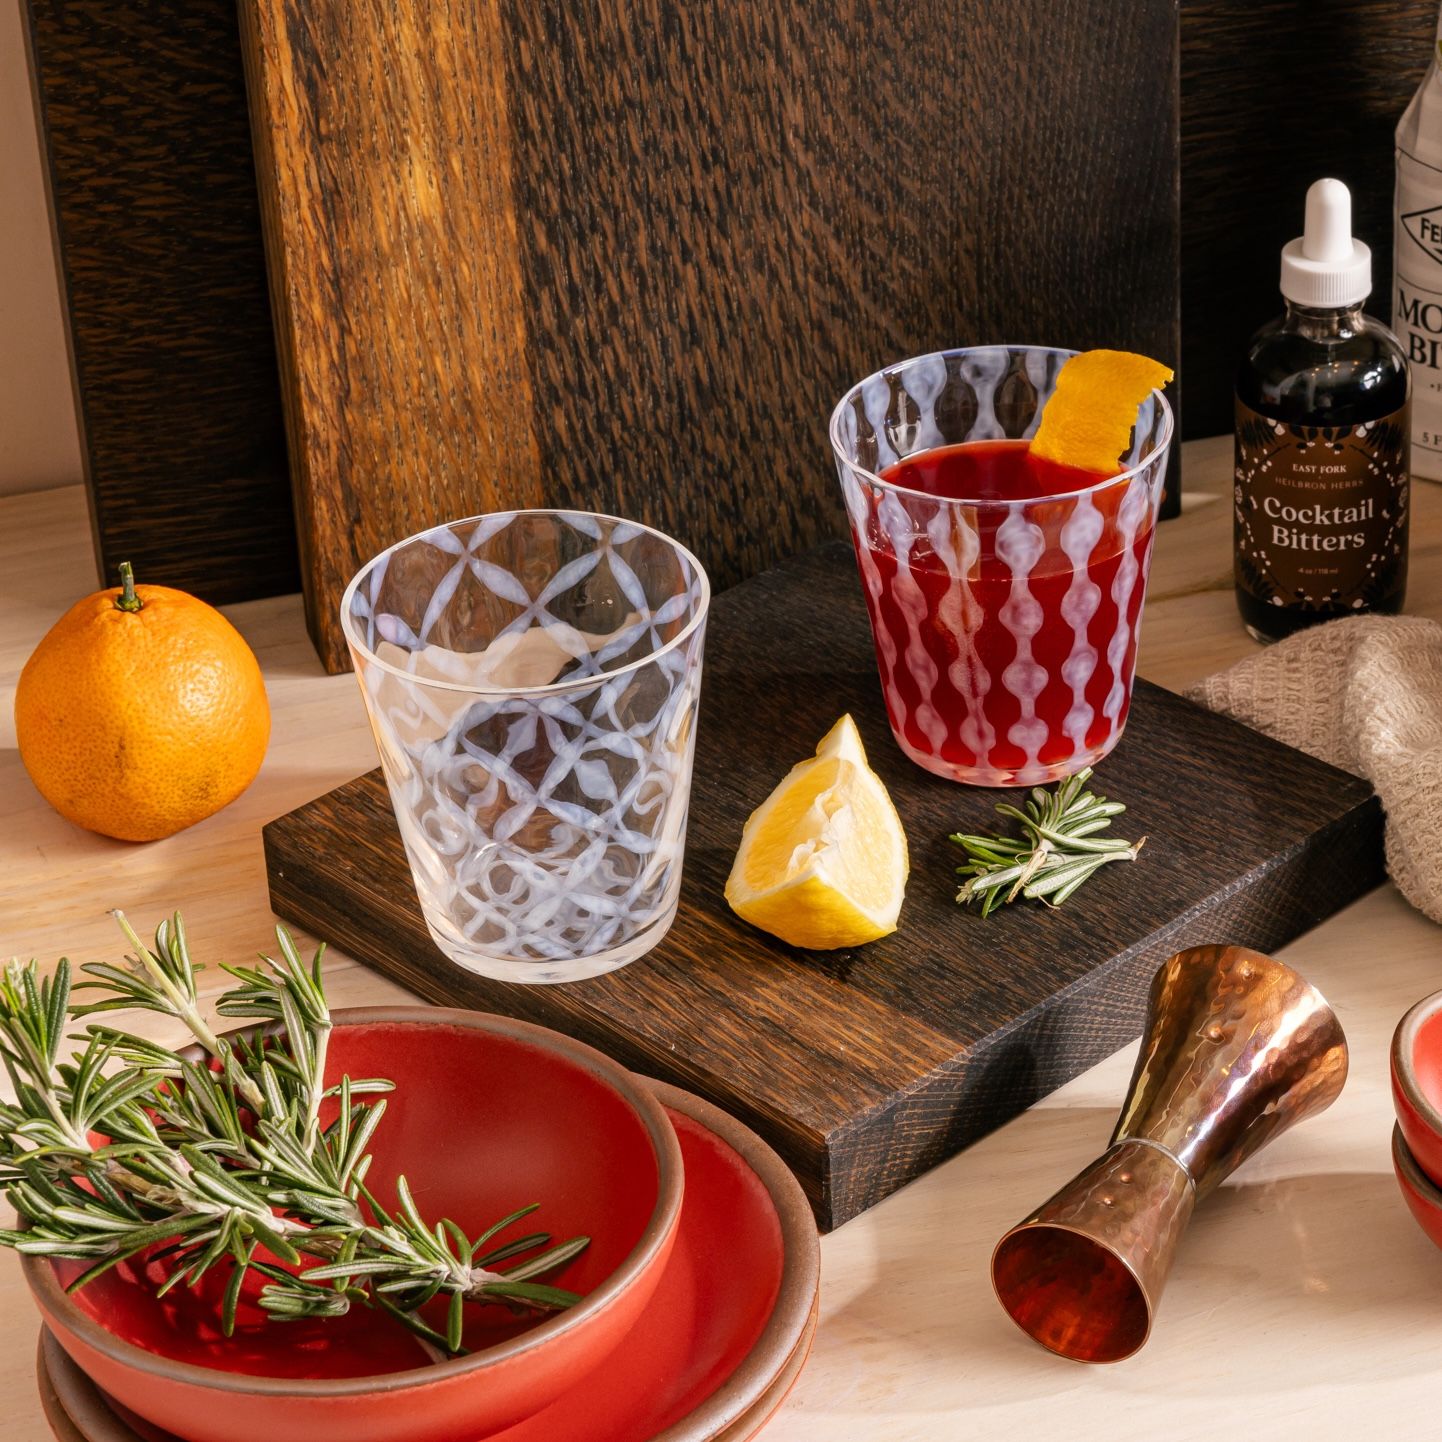 On a kitchen counter is a scene in the process of making cocktails, 2 tumbler glasses with frosted patterns, one filled with a red cocktail and orange slice. There's also walnut cutting boards, rosemary twigs, lemon slice, a shot measurer, and a small bowl and plate in a bold red color.